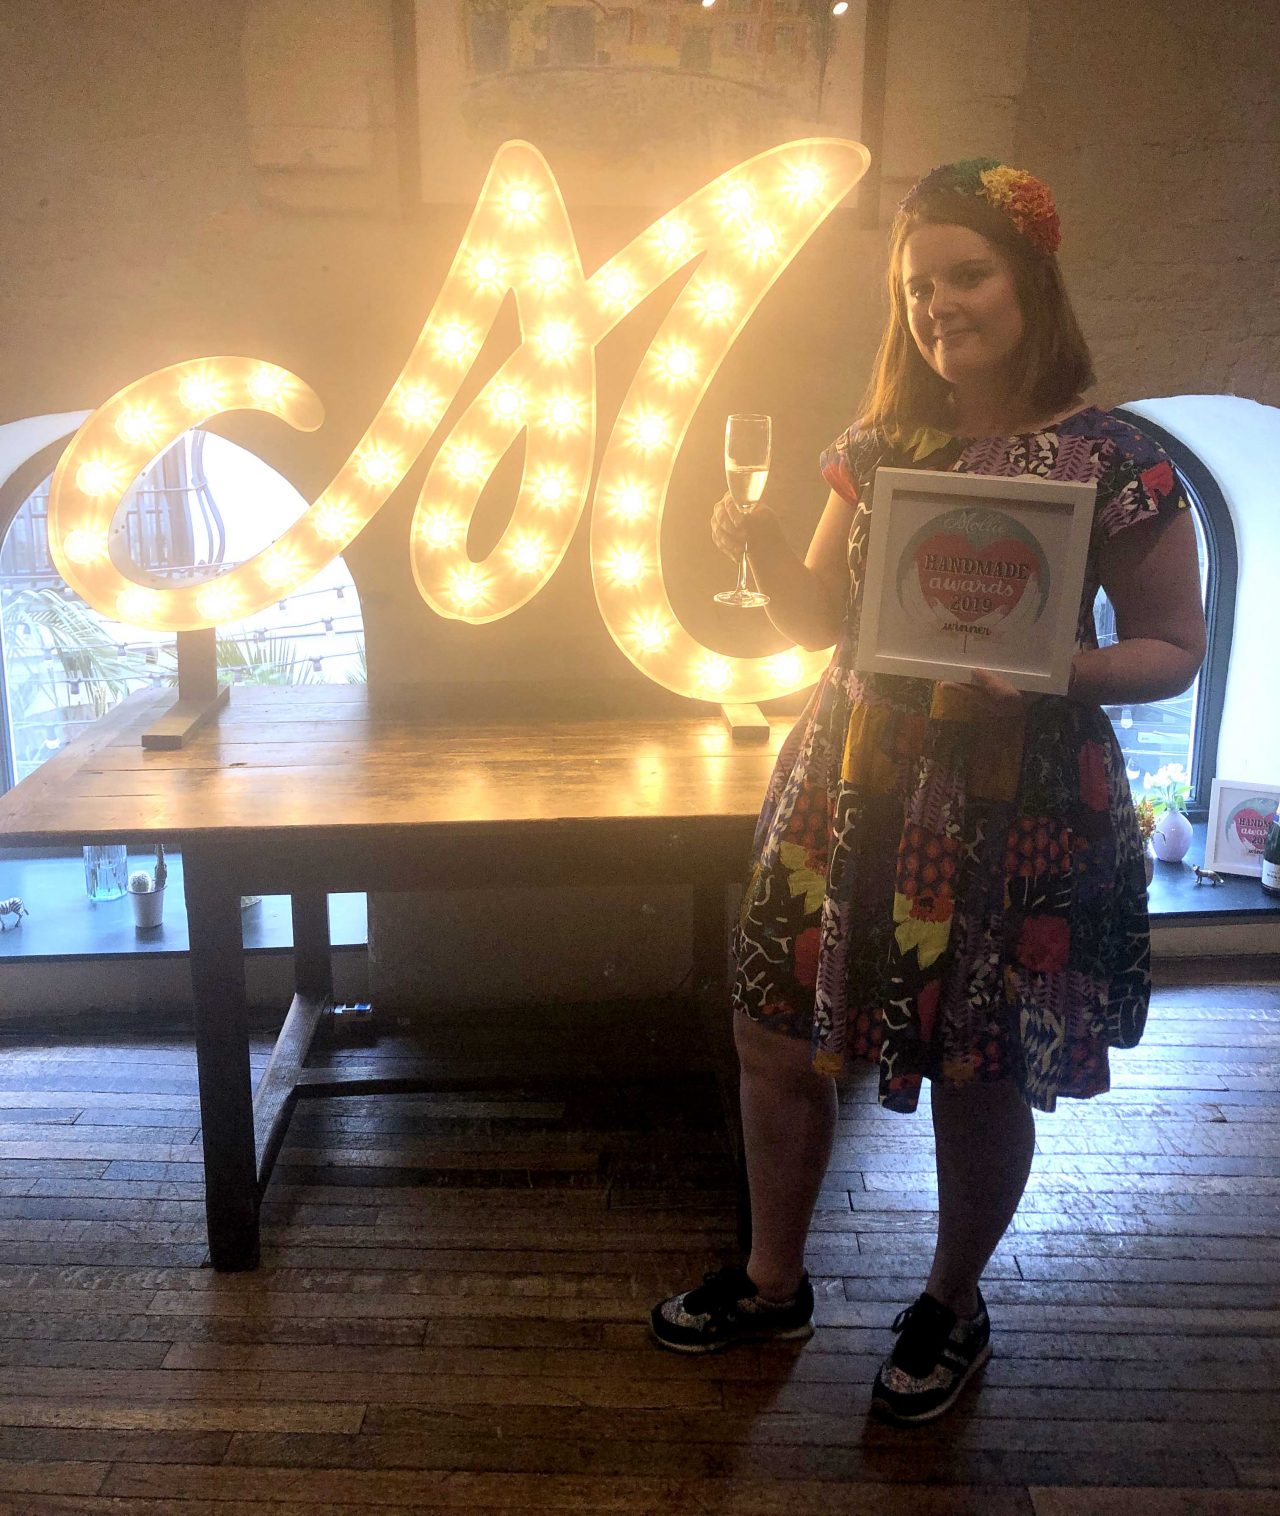 Elspeth Jackson with her Mollie Makes award at the Handmade Awards 2019